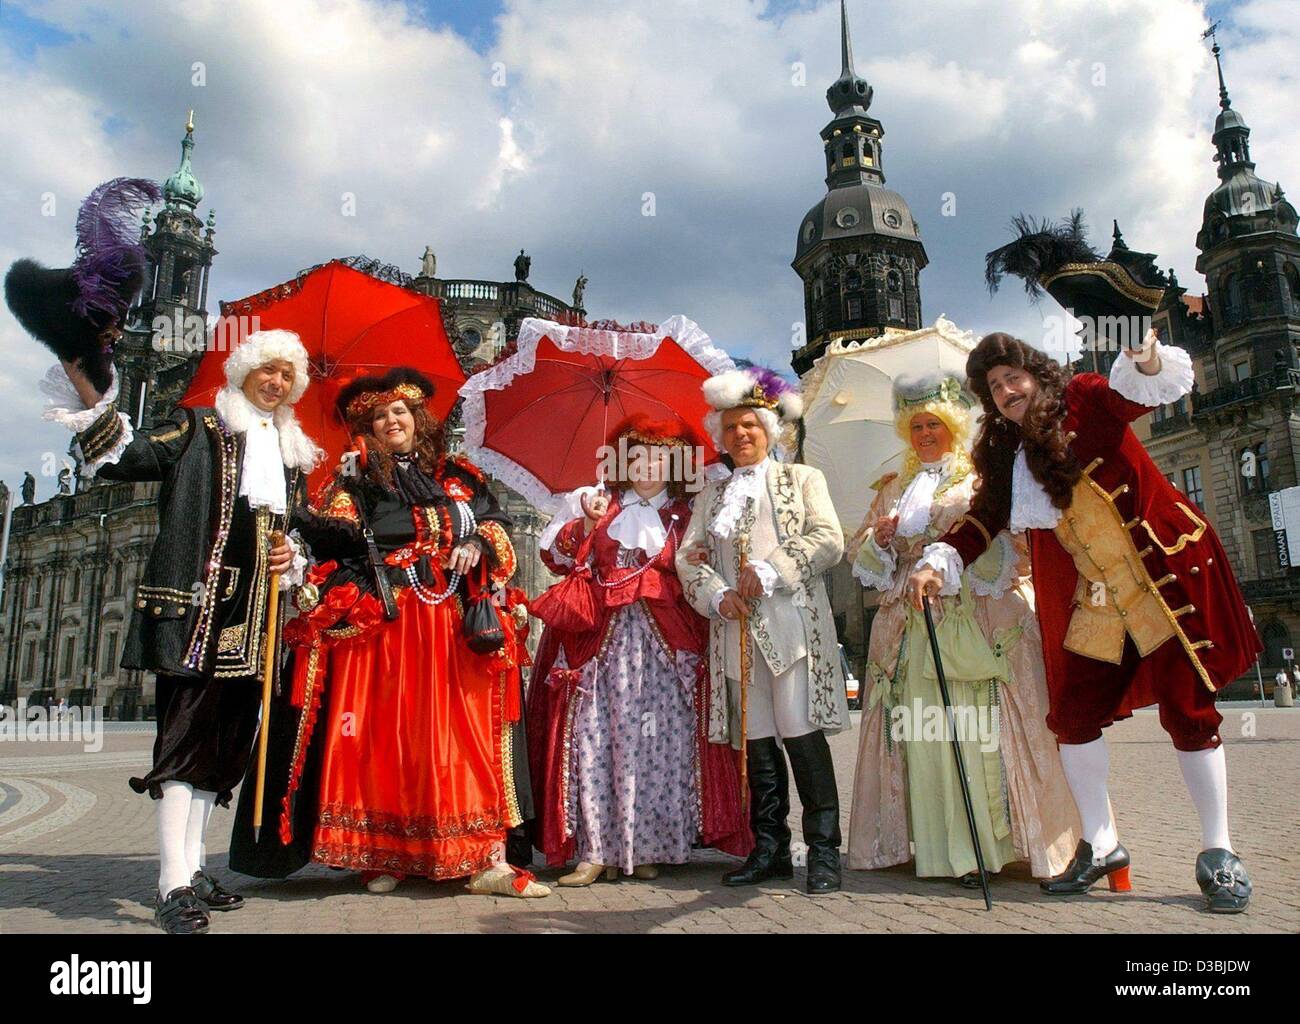 (dpa) - The members of the 'Barocker Dresdner Hofstaat von 1703' (Dresden's Baroque royal court from 1703) pose in their self-made costumes on the Theater square in Dresden, Germany, 21 May 2003. In their spare time they take advantage of every free minute to make Dresden more colourful with their B Stock Photo